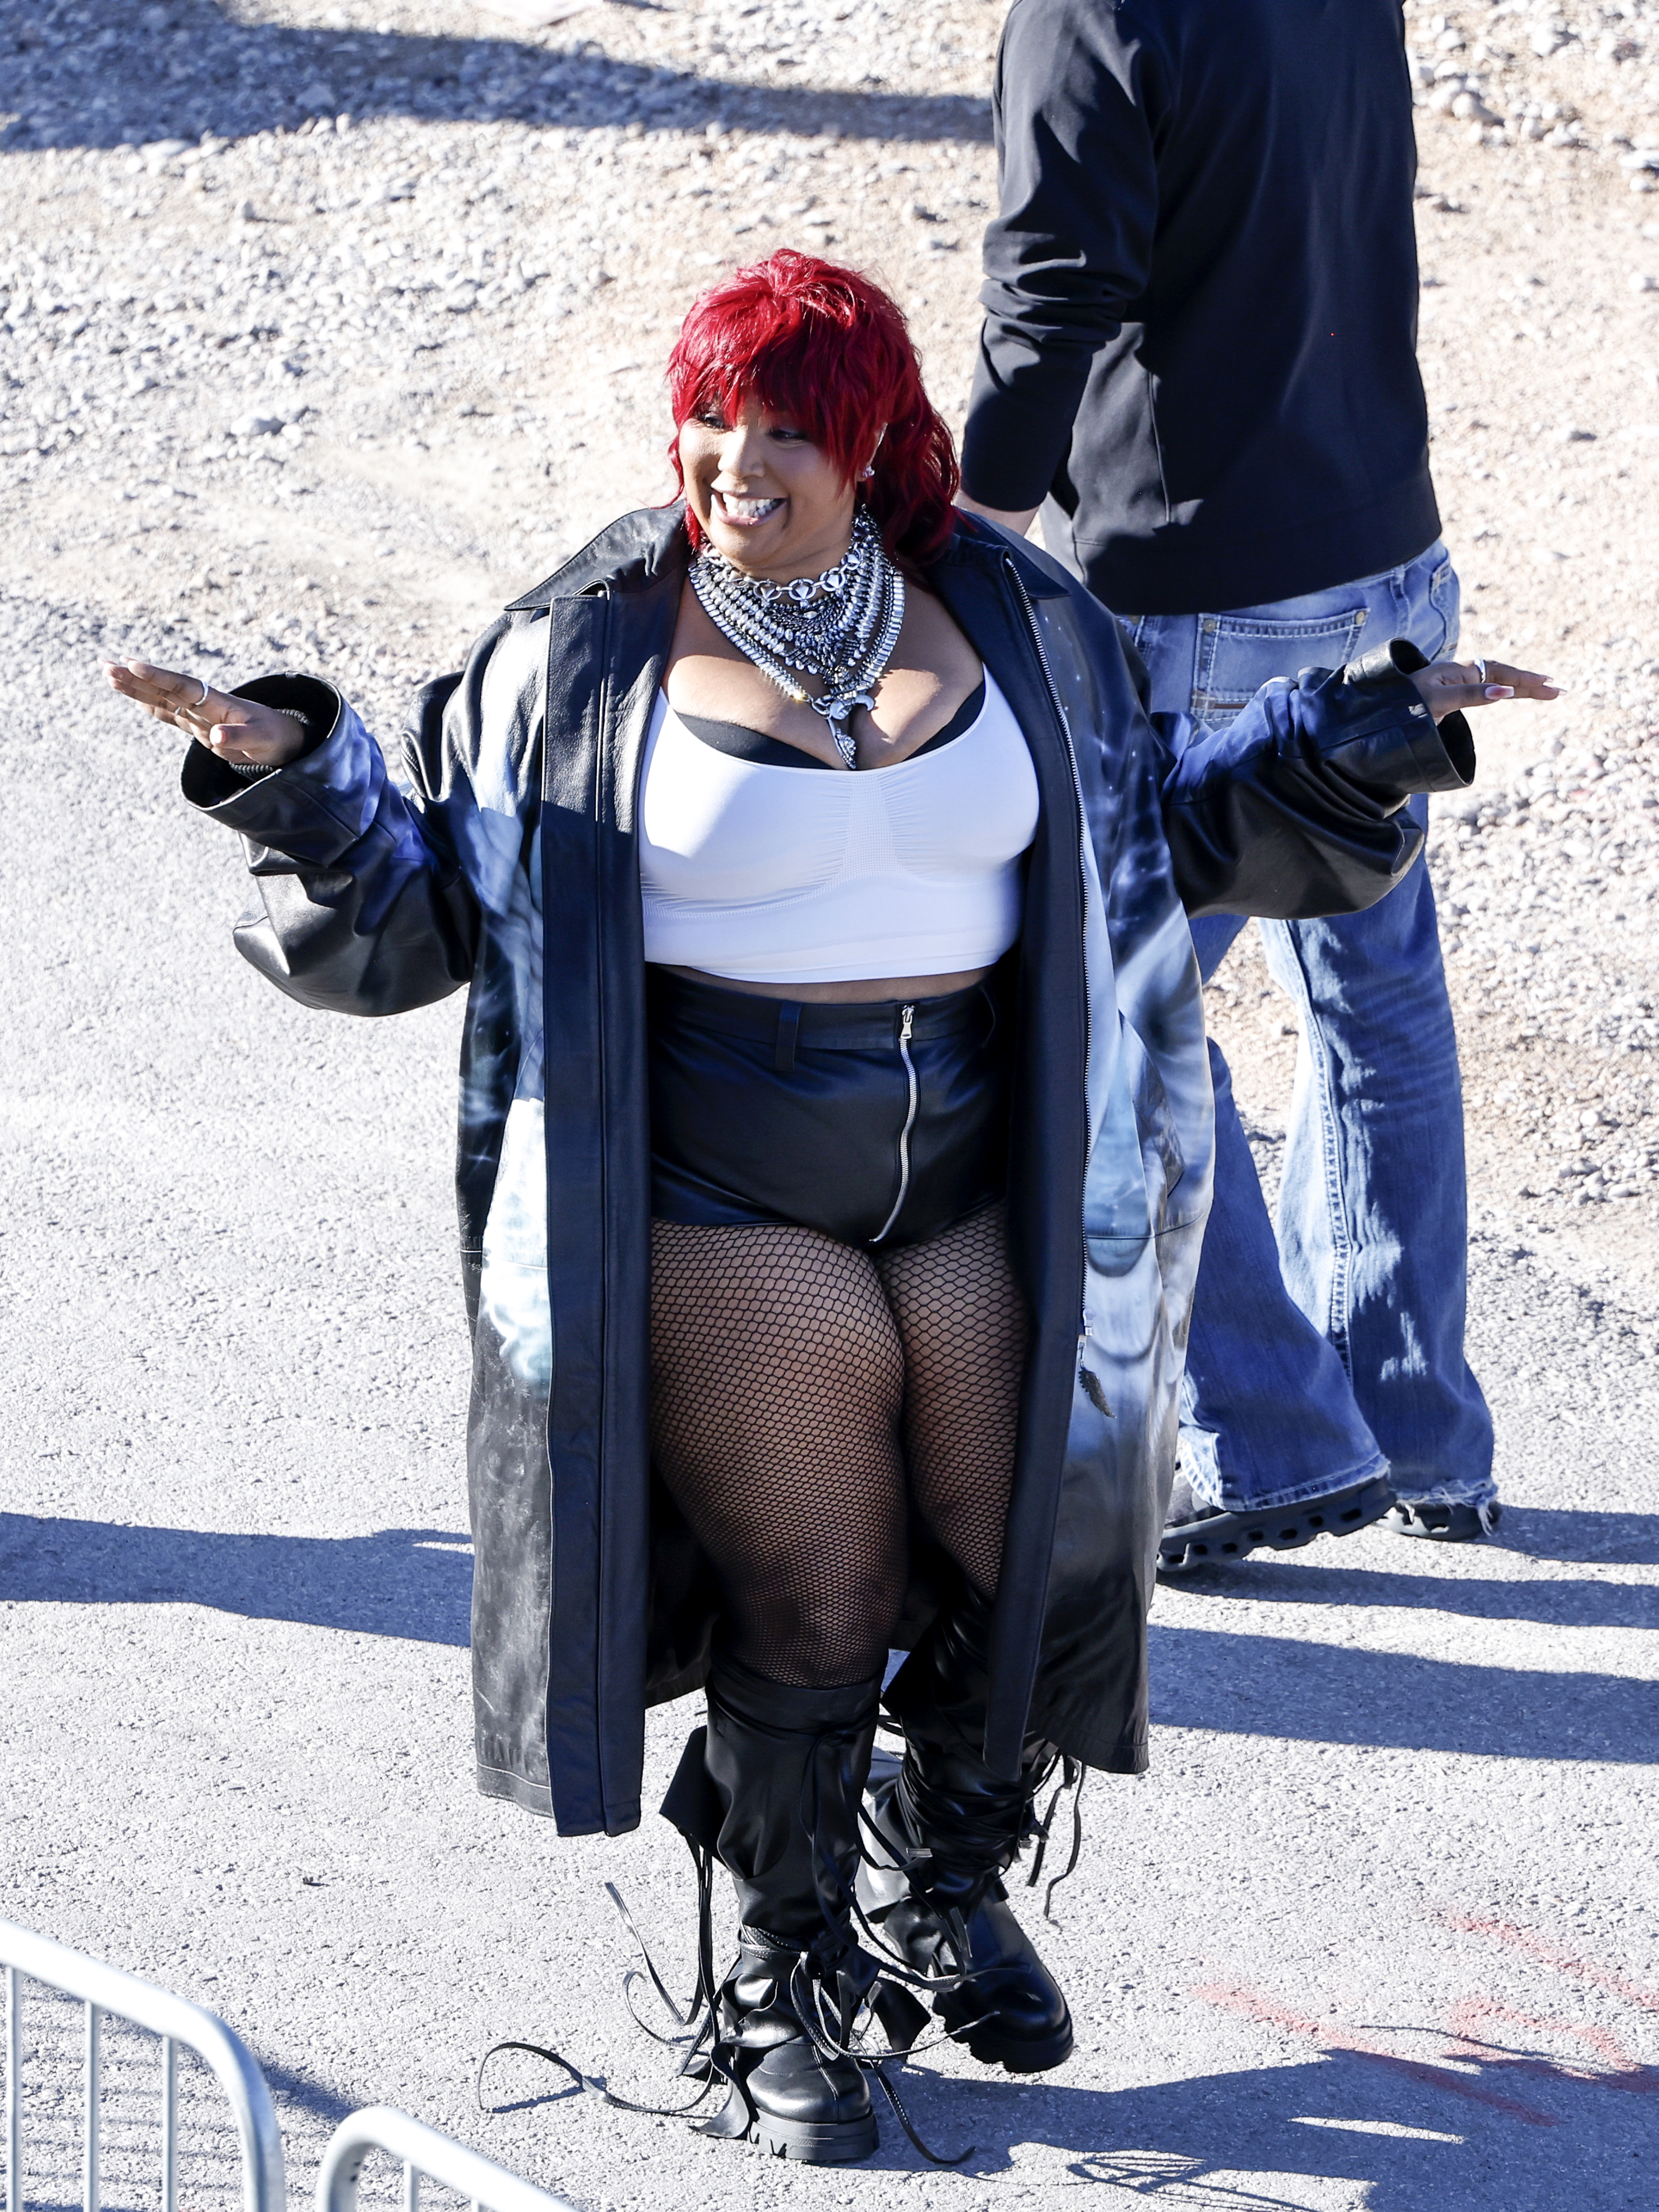 Lizzo is wearing a top, jacket, fishnet tights, and boots as she smiles and gestures while walking outside at an event